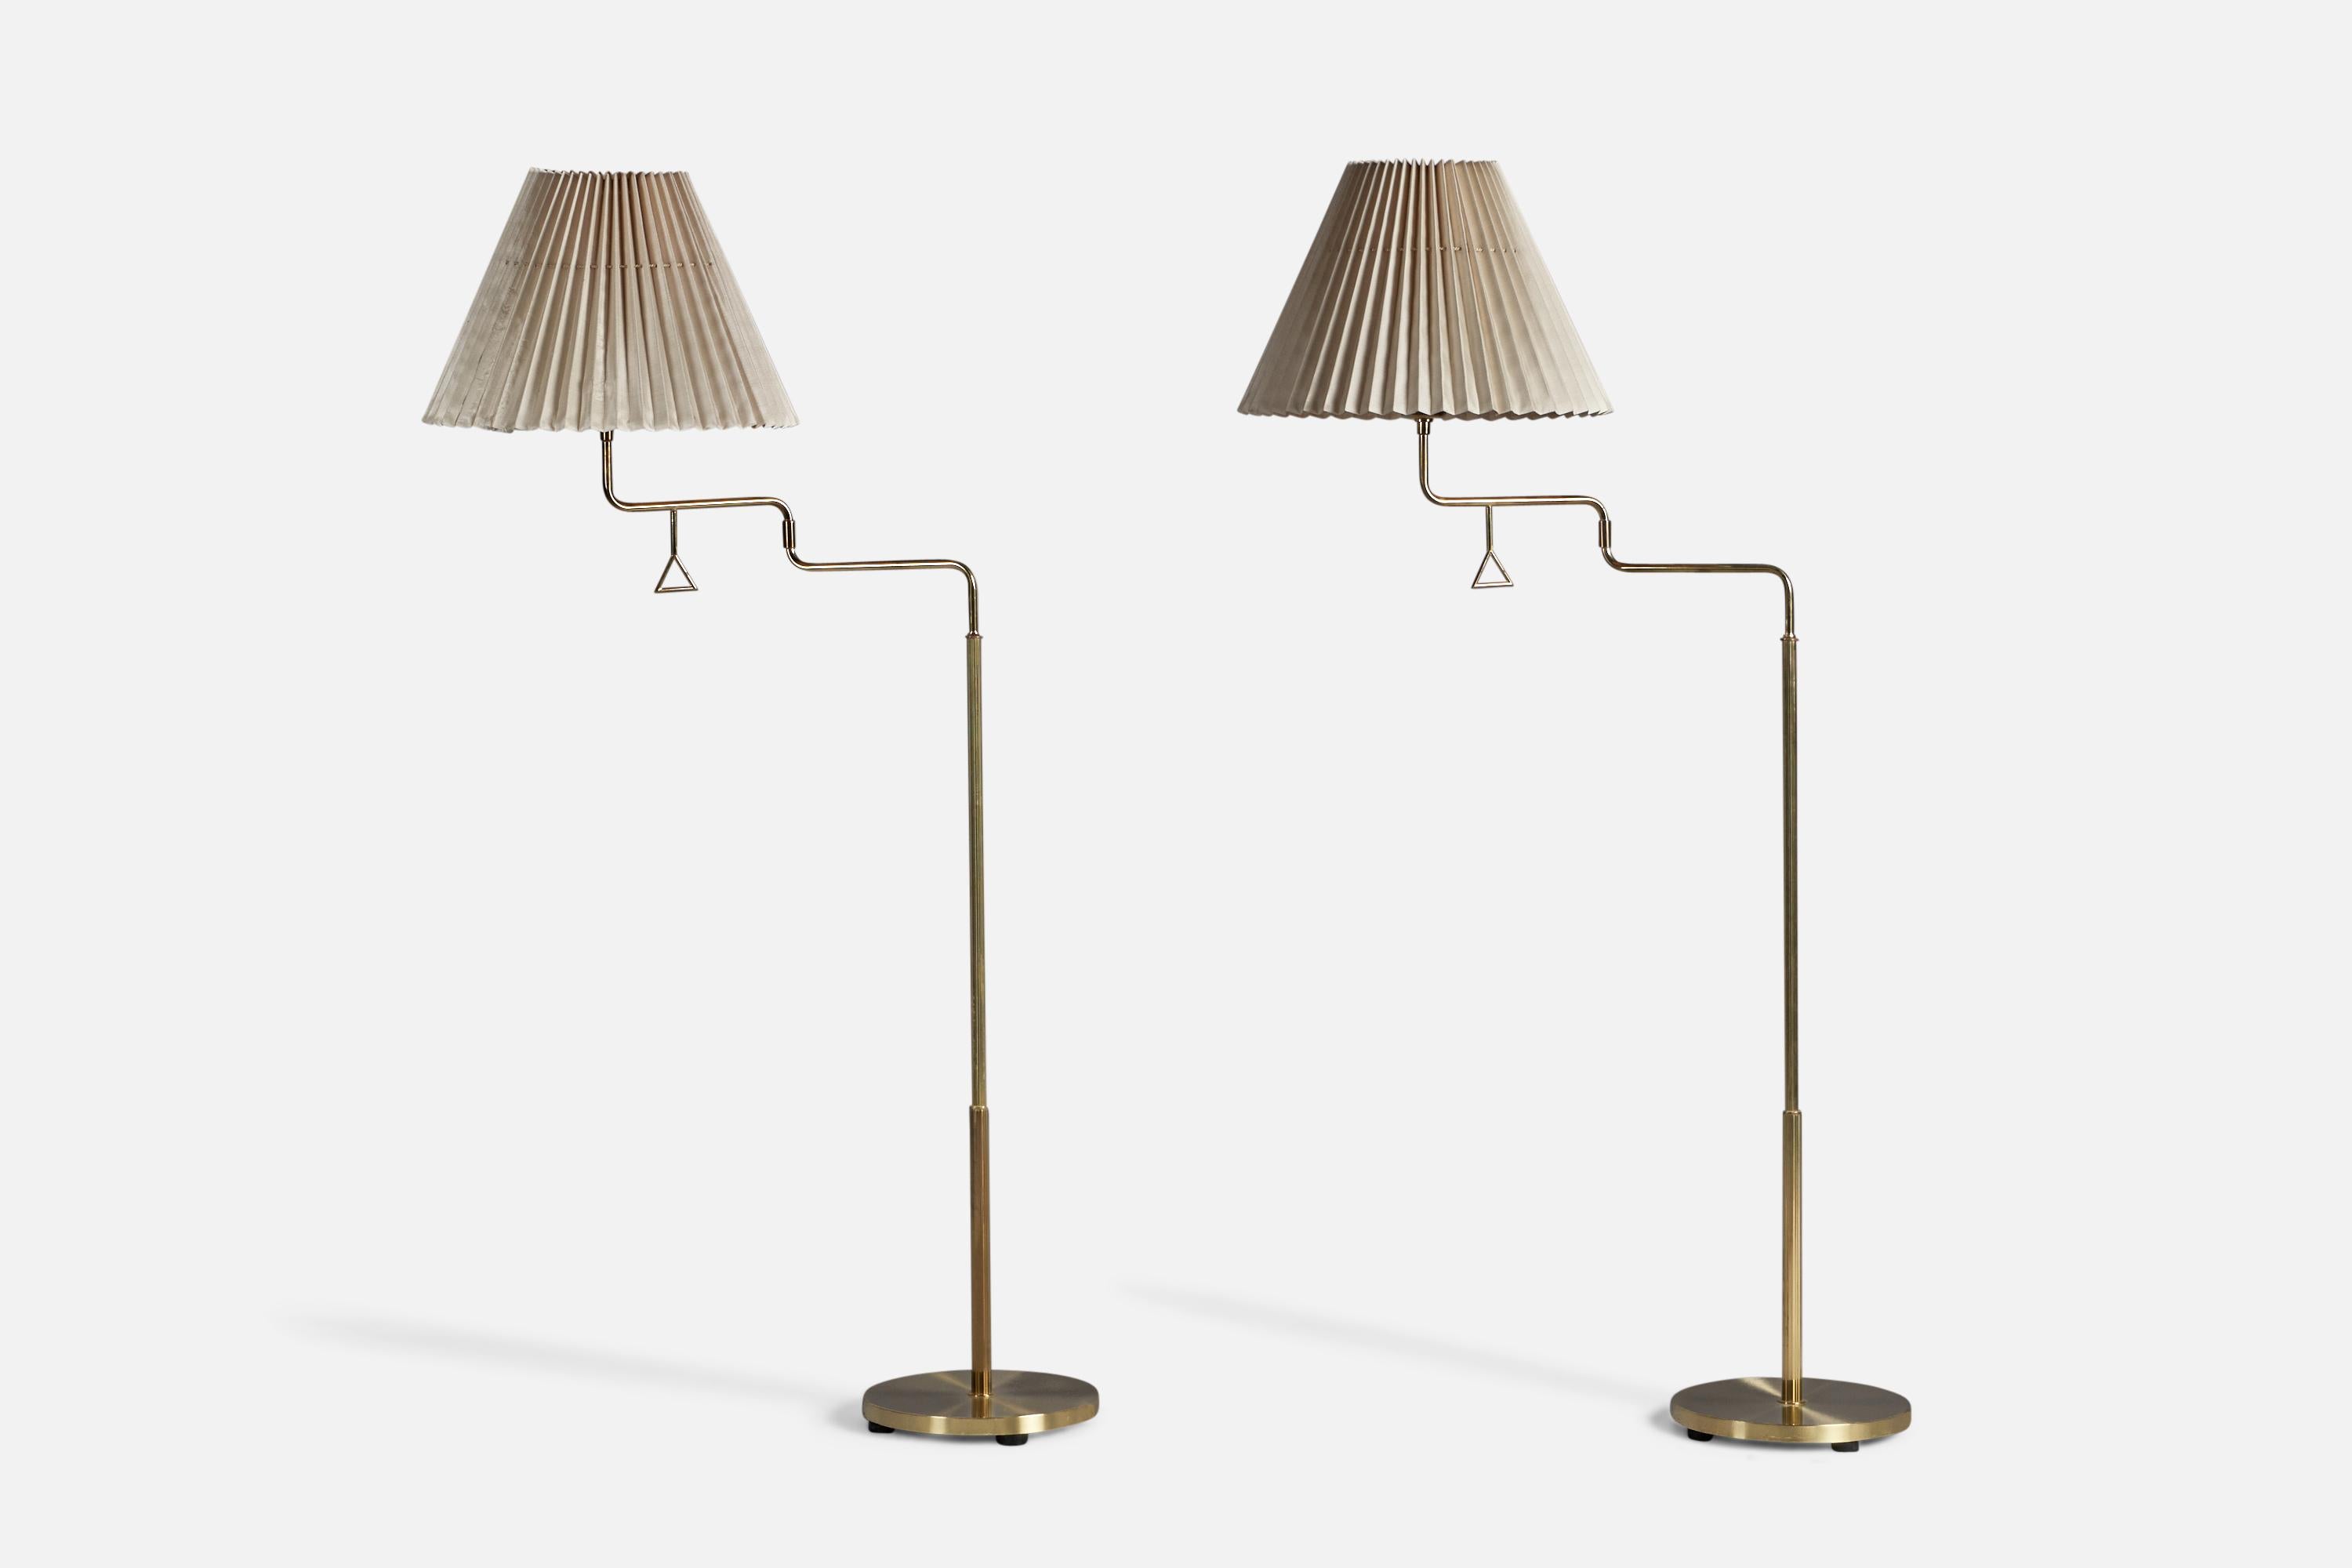 A pair of adjustable brass and light beige fabric floor lamp designed and produced by Armaturhantverk Tibro, Sweden, c. 1960s.

Fully Extended Dimensions (inches): 63